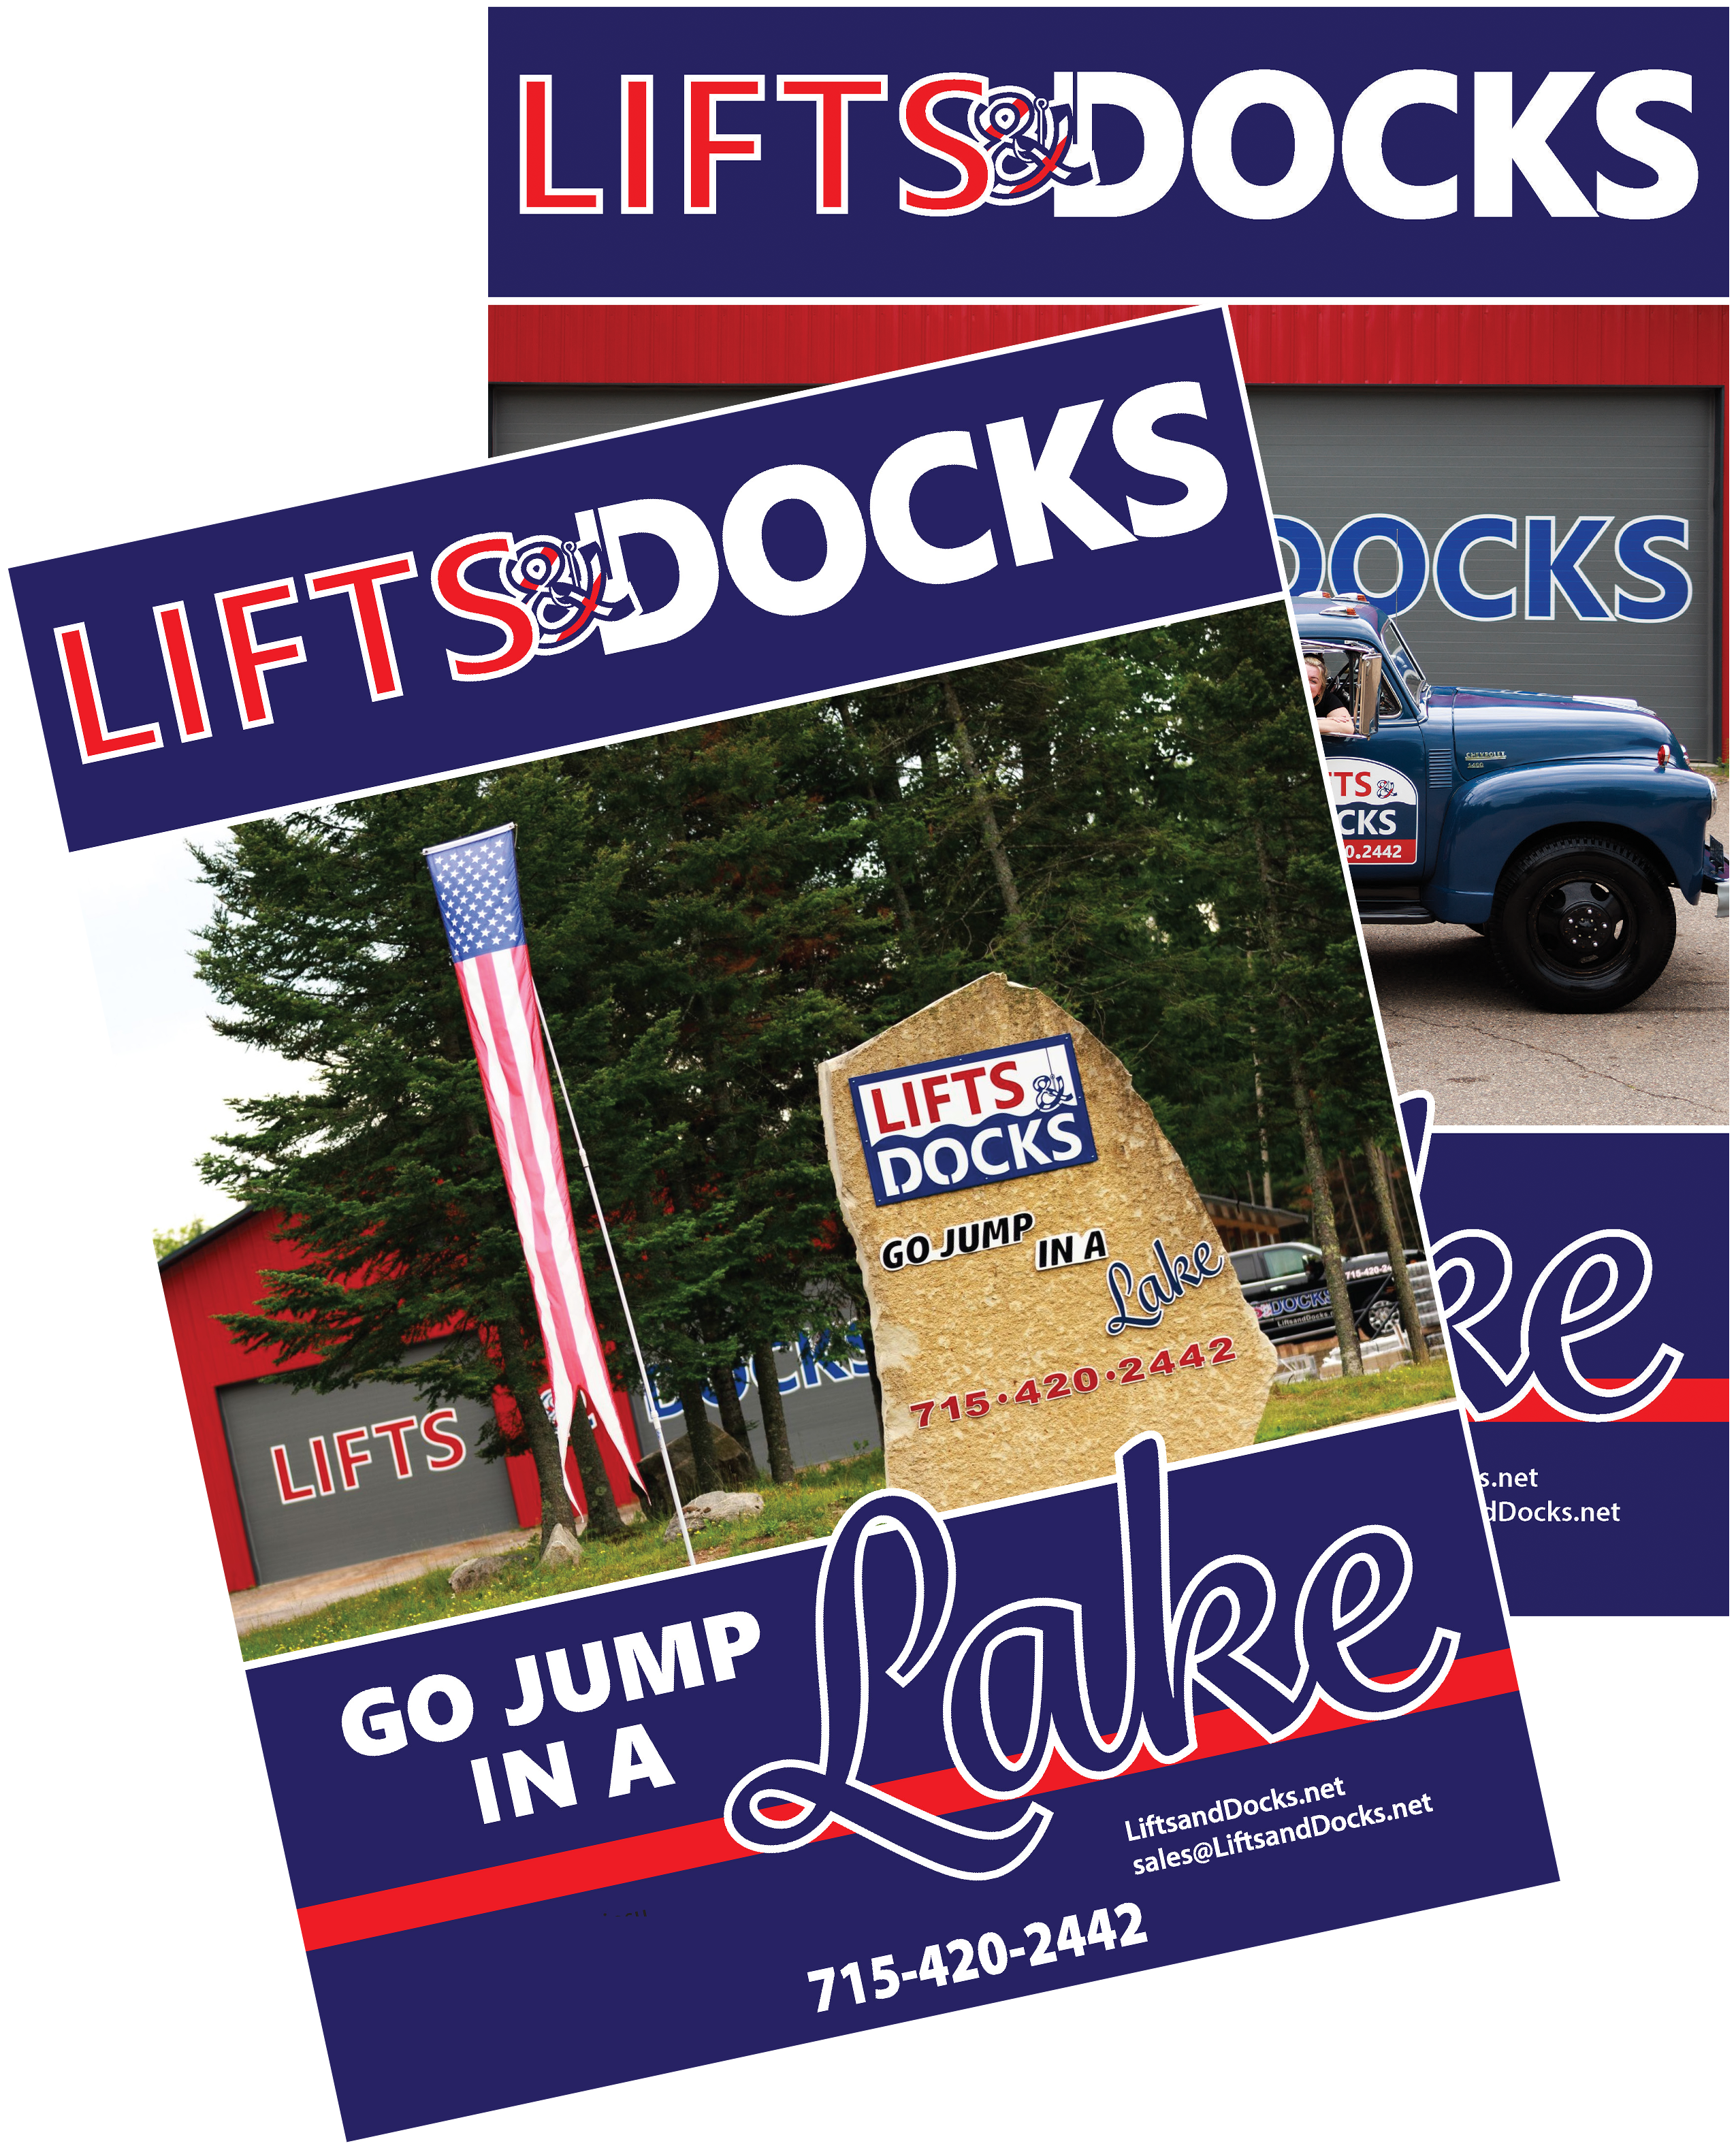 Lifts and Docks